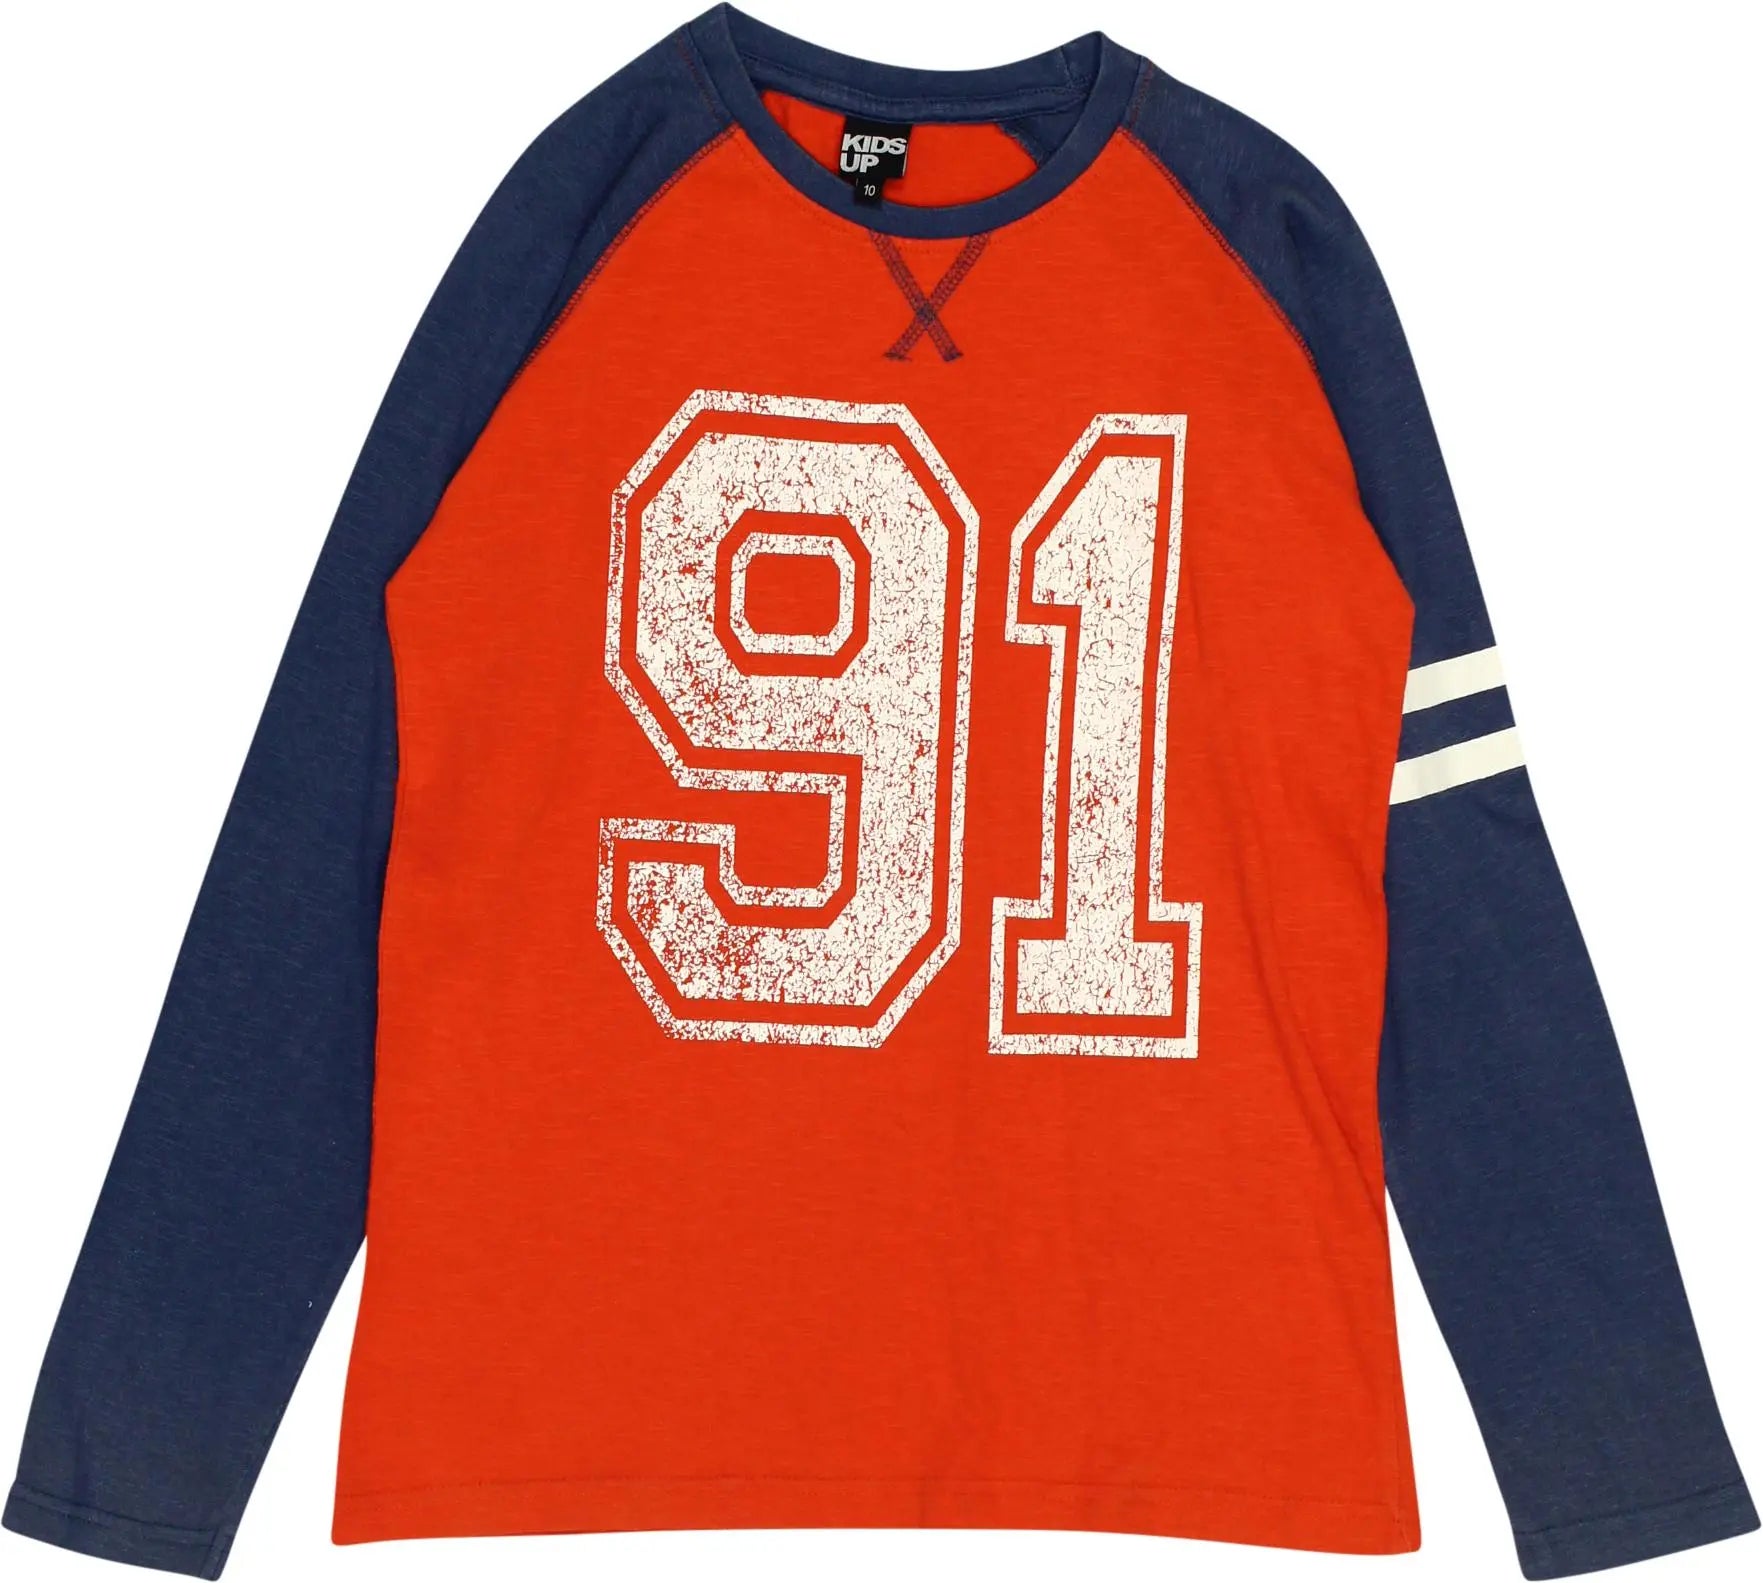 Kids Up - Orange Long Sleeve T-shirt- ThriftTale.com - Vintage and second handclothing